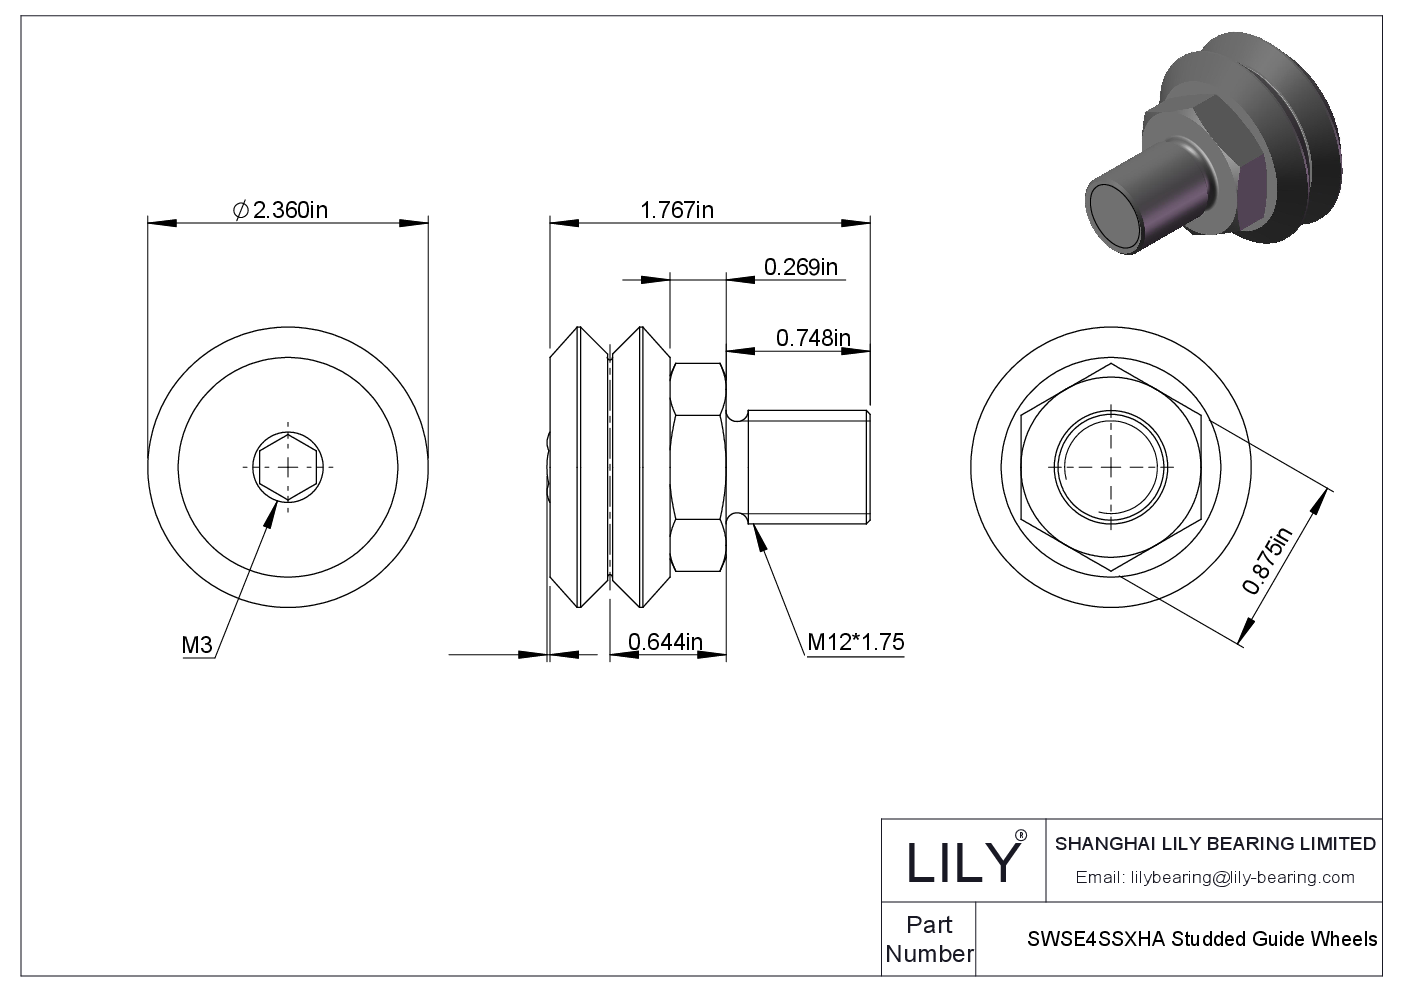 SWSE4SSXHA Studded Guide Wheels cad drawing